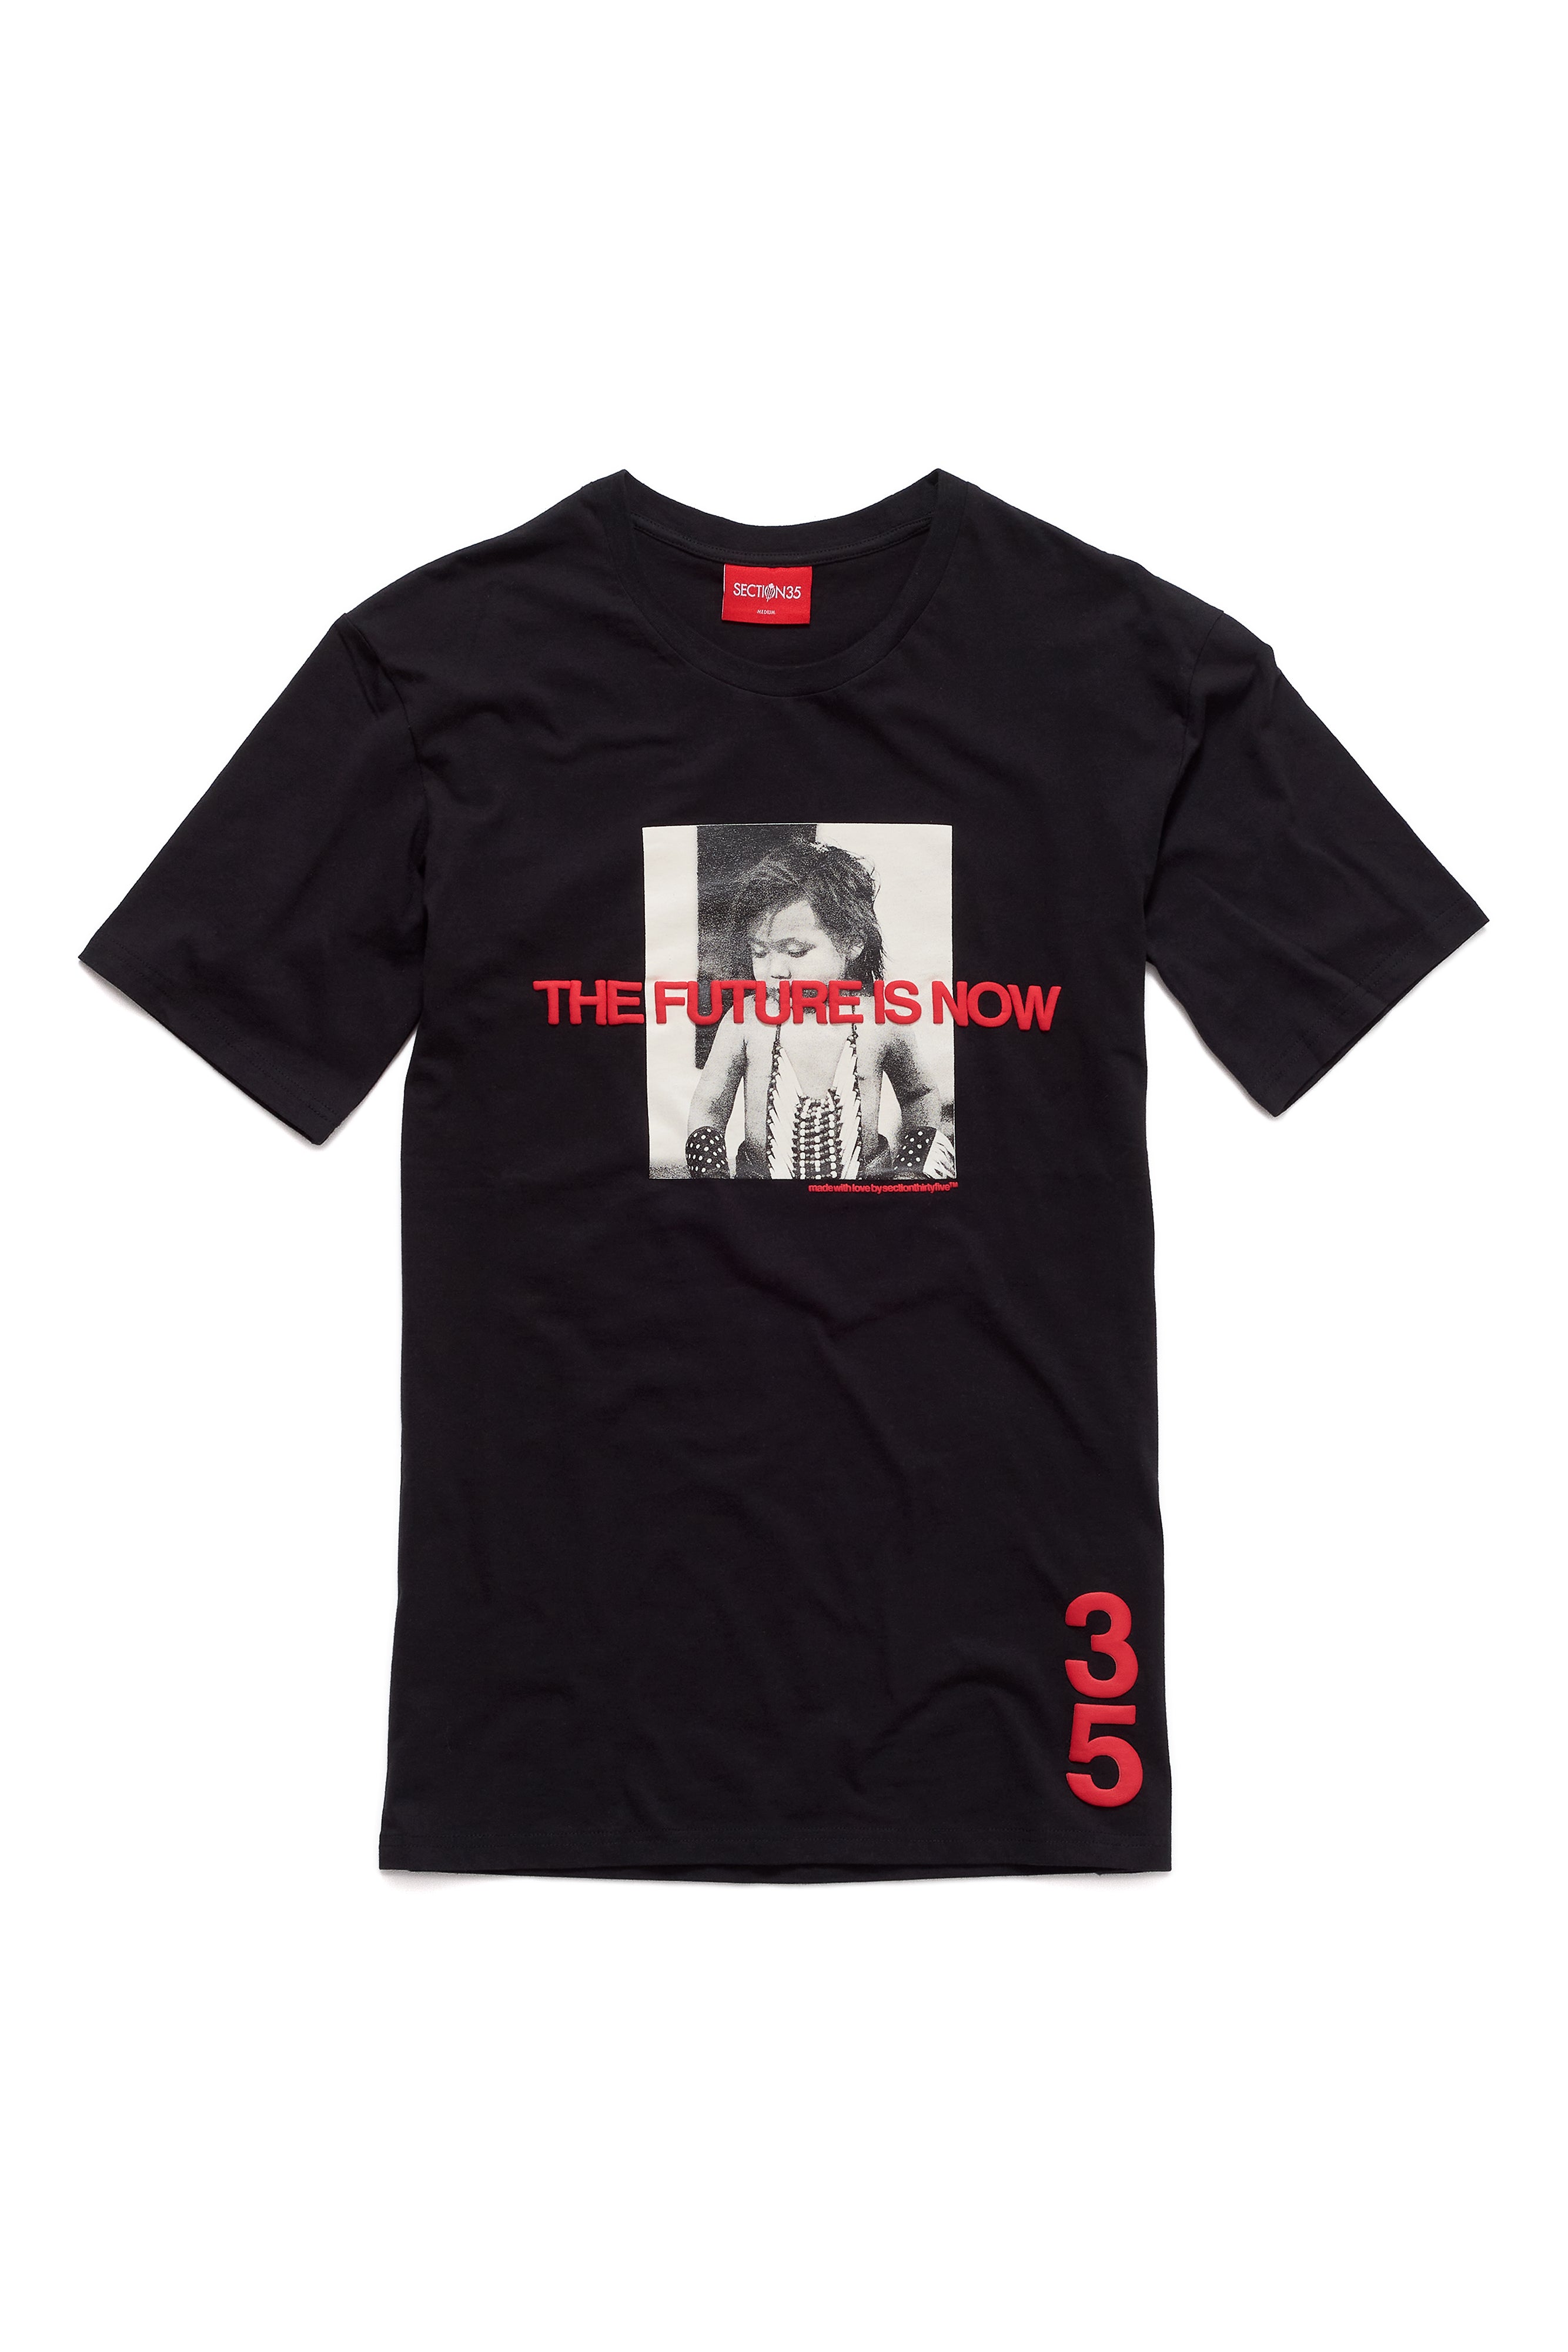 The Future Is Now Tee - Black